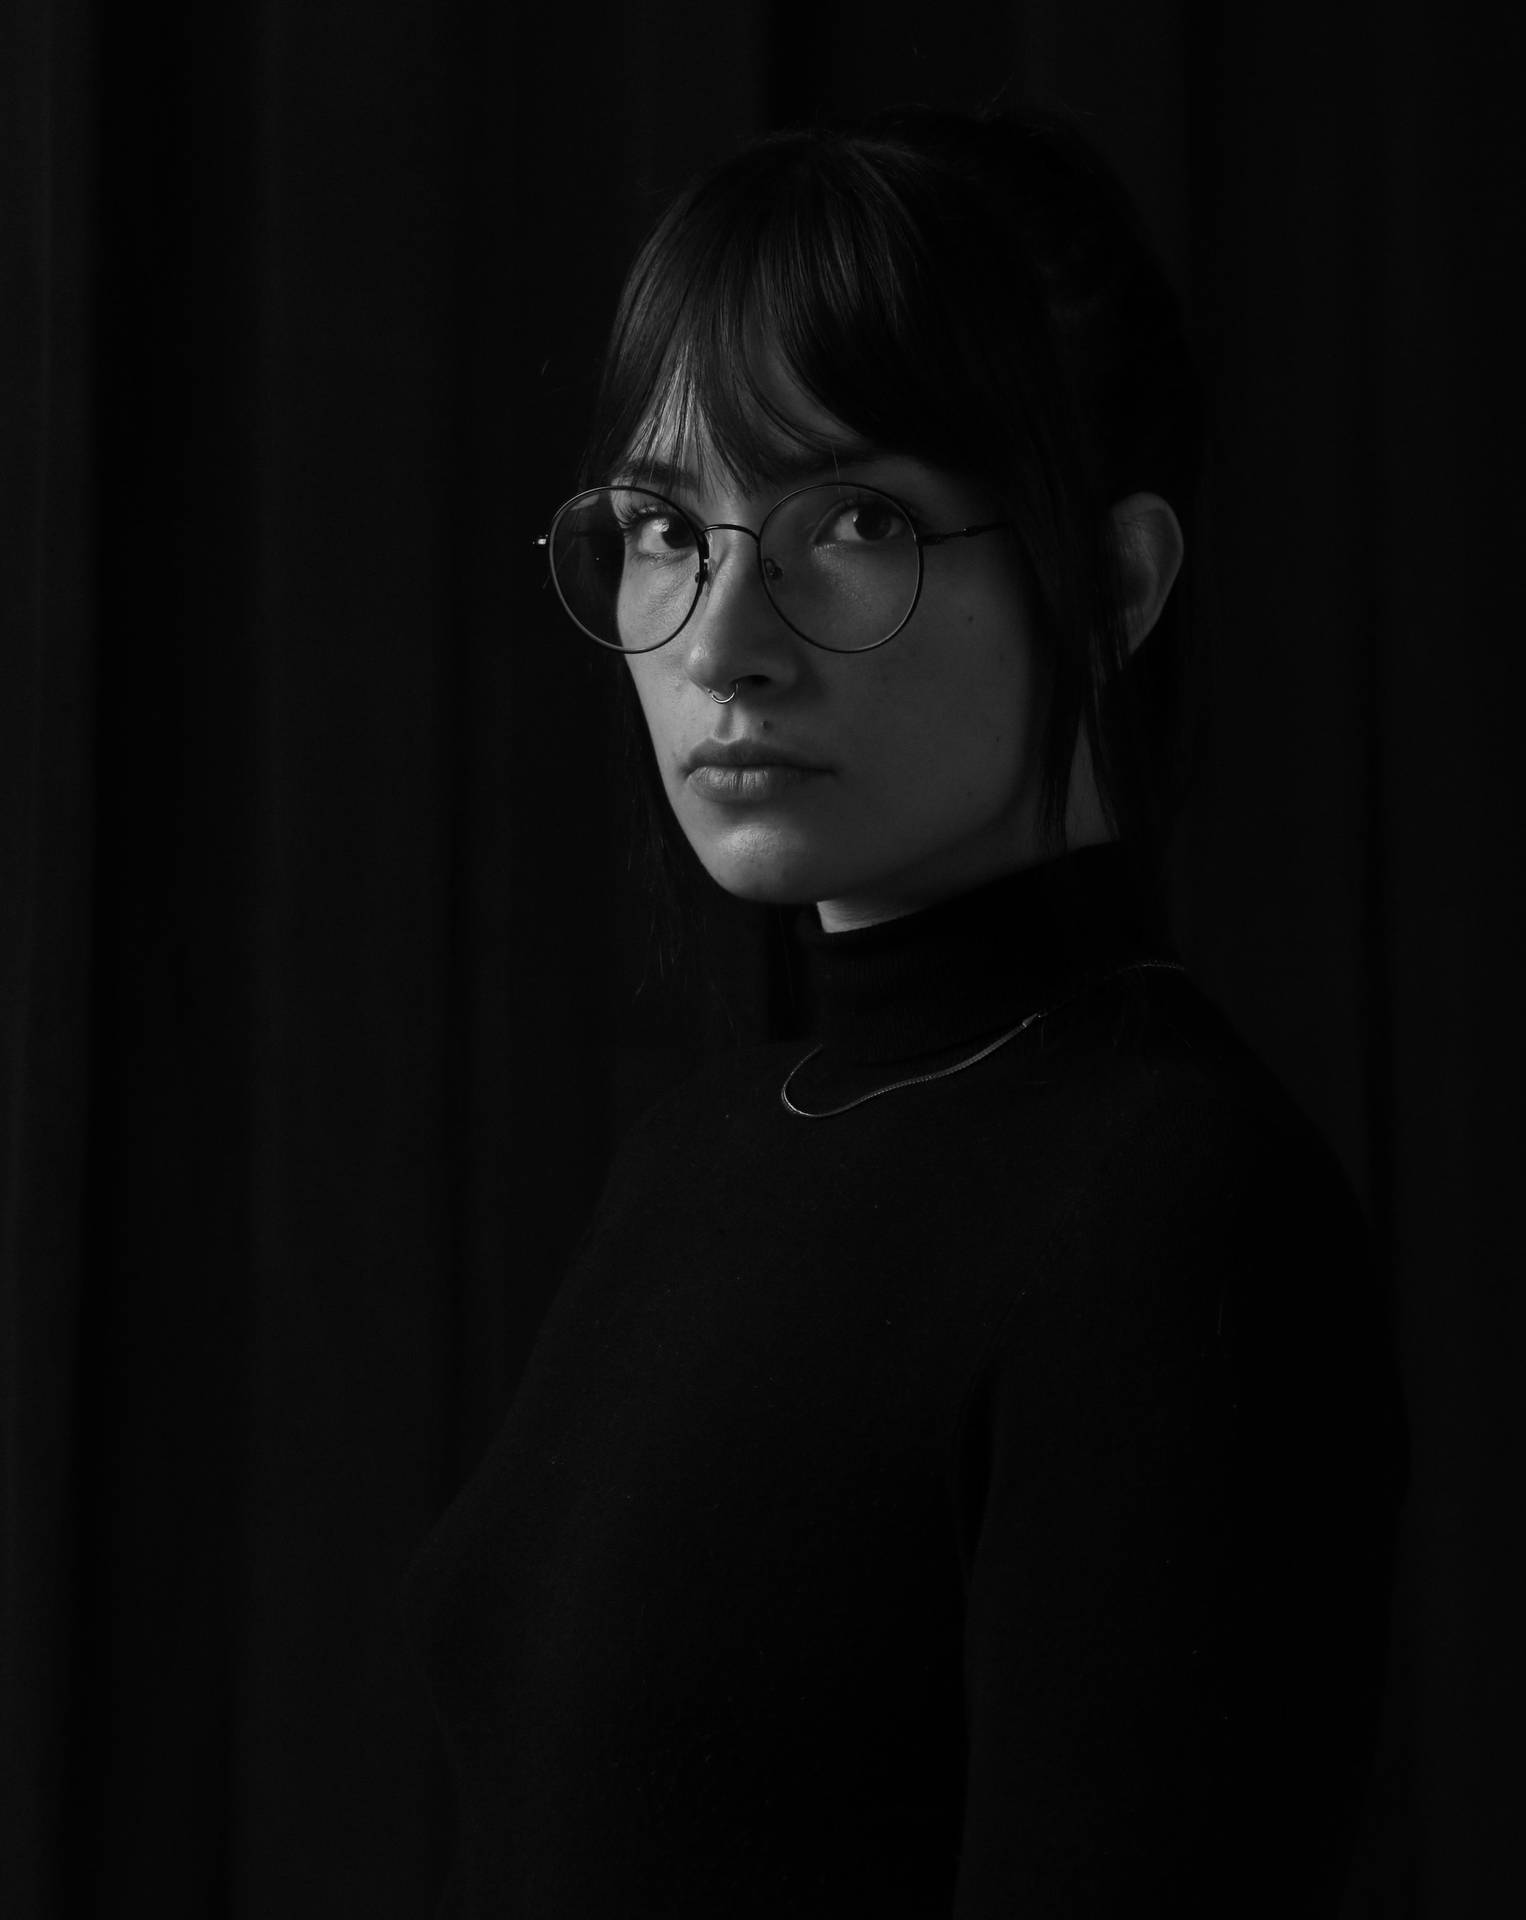 Black And White Portrait Of A Woman With Eyeglasses Wallpaper